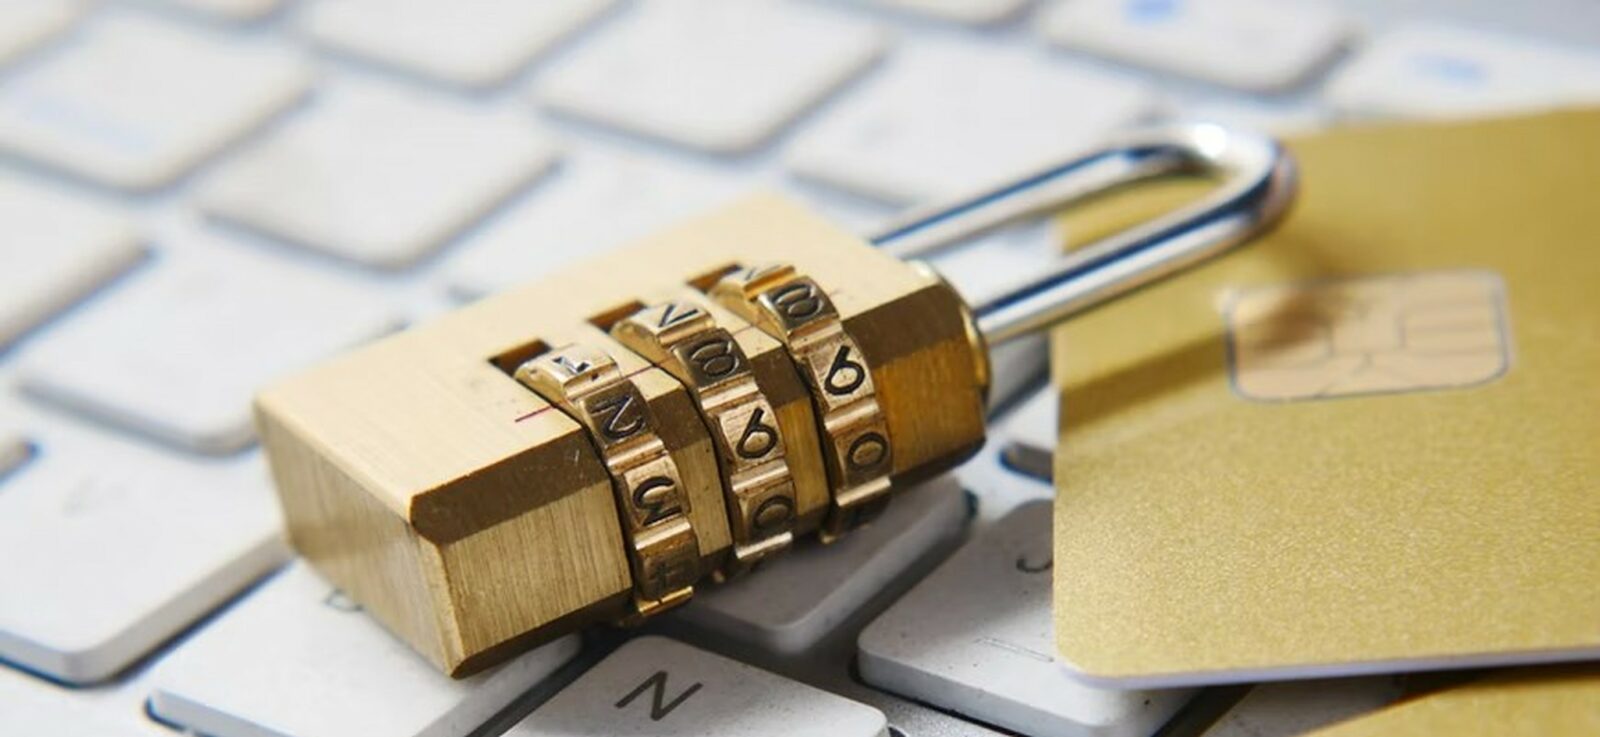 How to password protect all your files